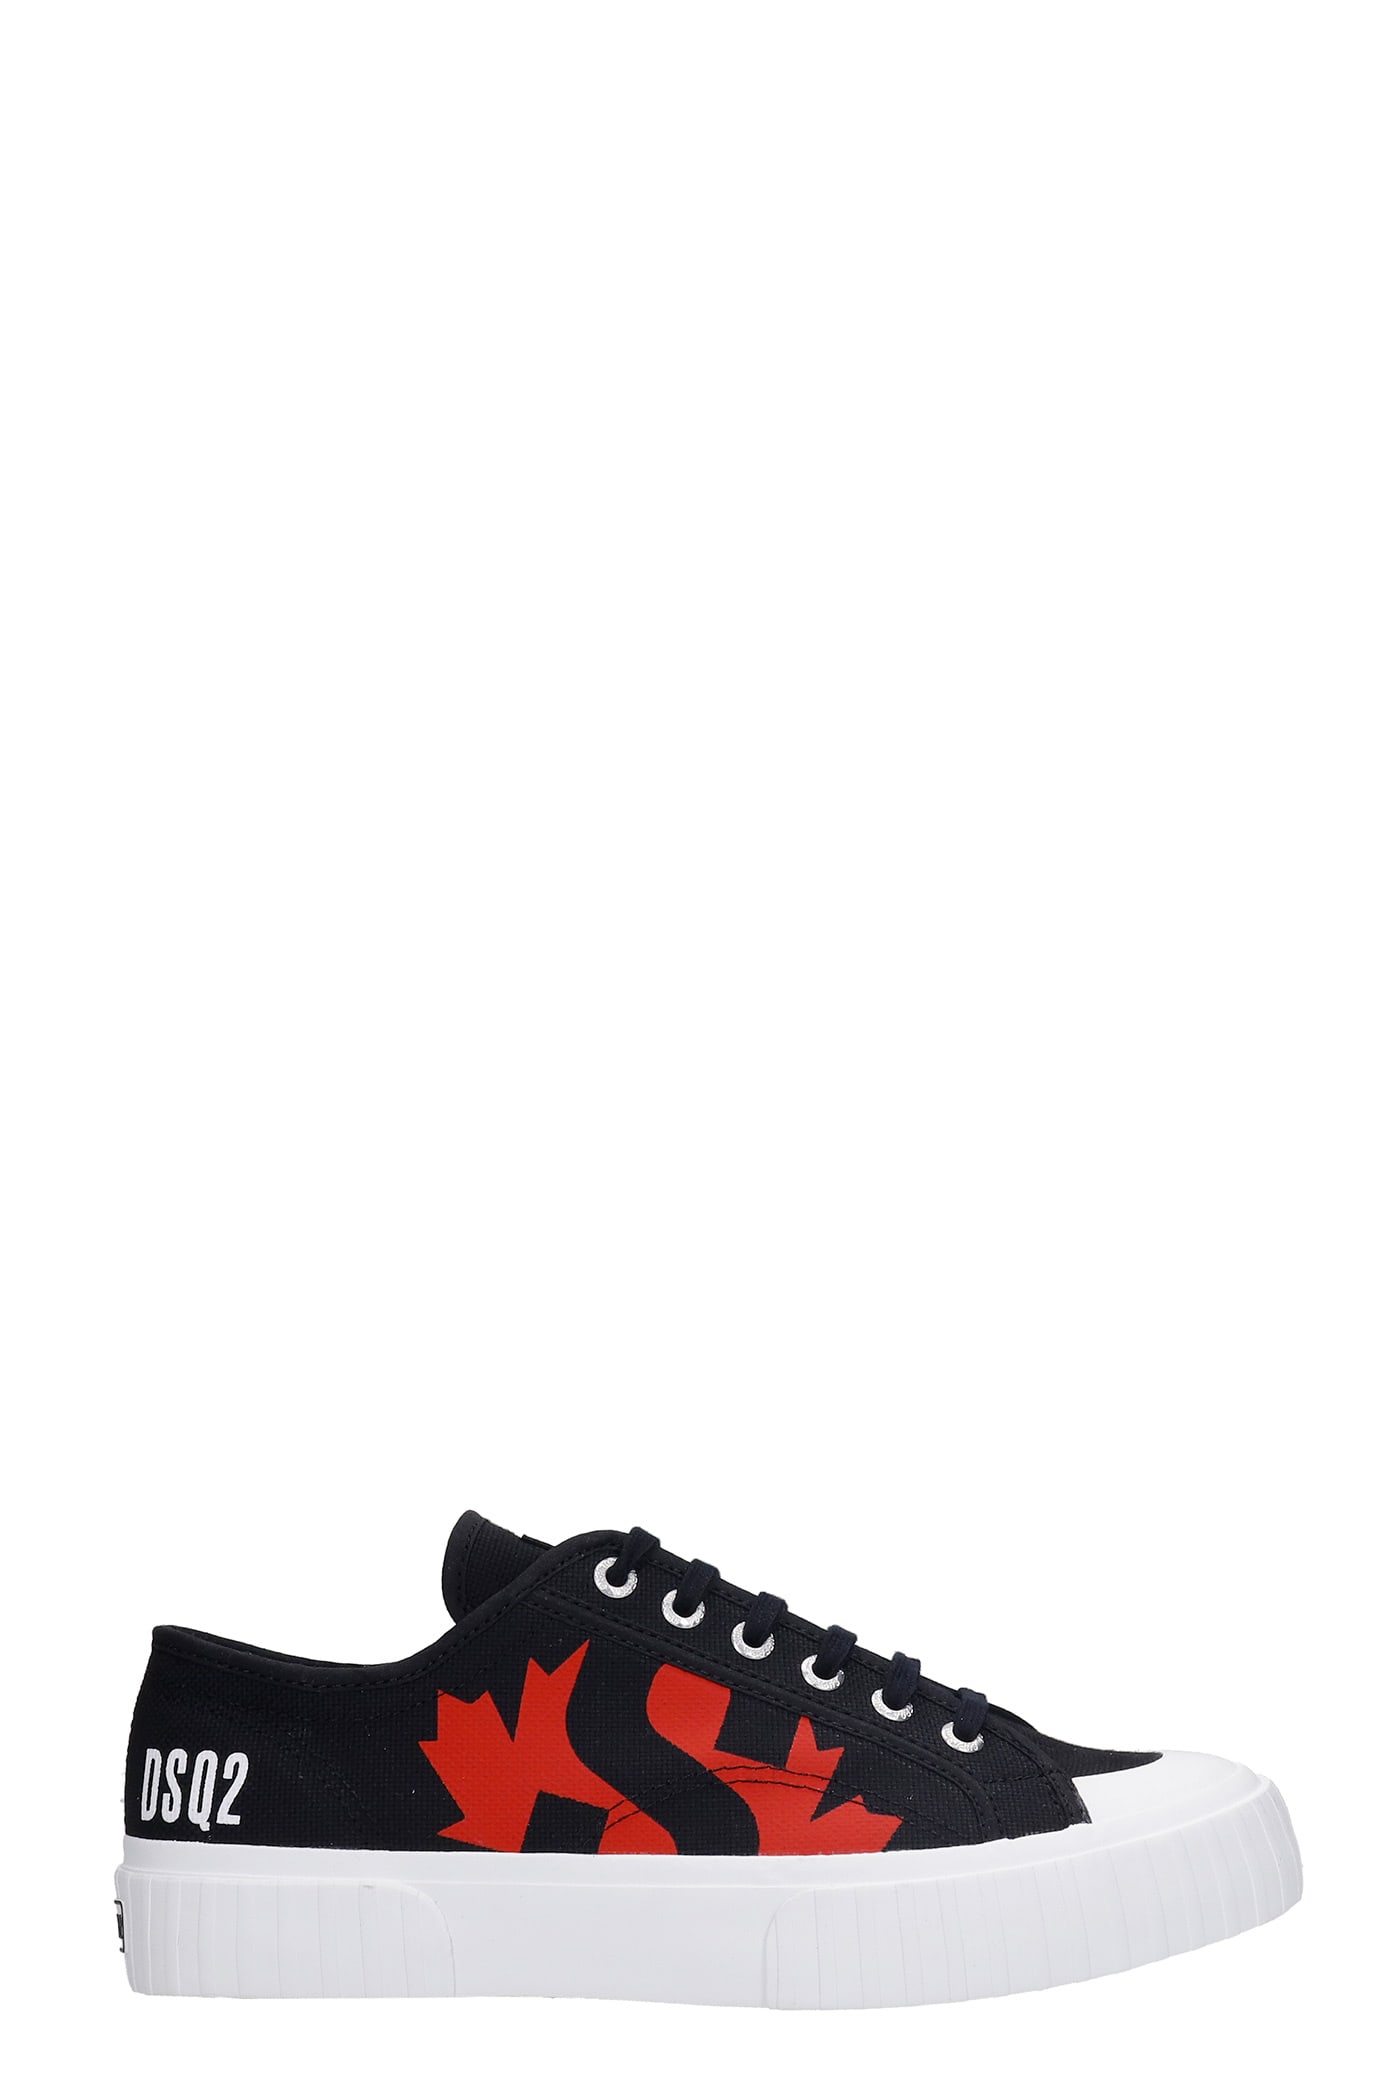 Dsquared2 Sneakers In Black Canvas